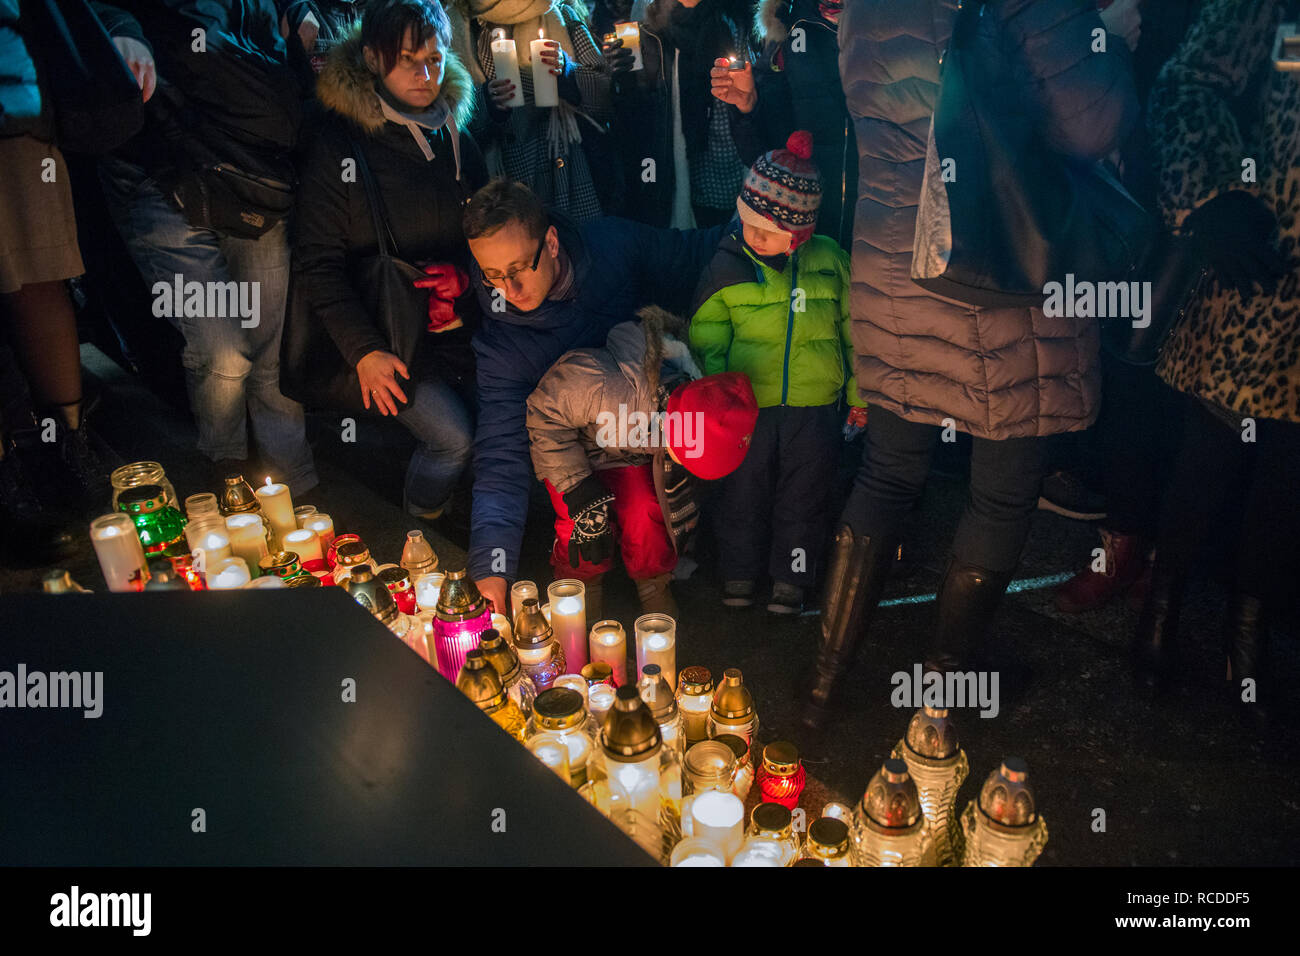 A family with young children are seen lightning candles in memory of mayor Pawel Adamowicz. Pawel Adamowicz, the mayor of the Polish city of Gdansk died after being stabbed several times on stage during the Great Orchestra of Christmas Charity, Poland’s most important charity on Sunday evening. Stock Photo